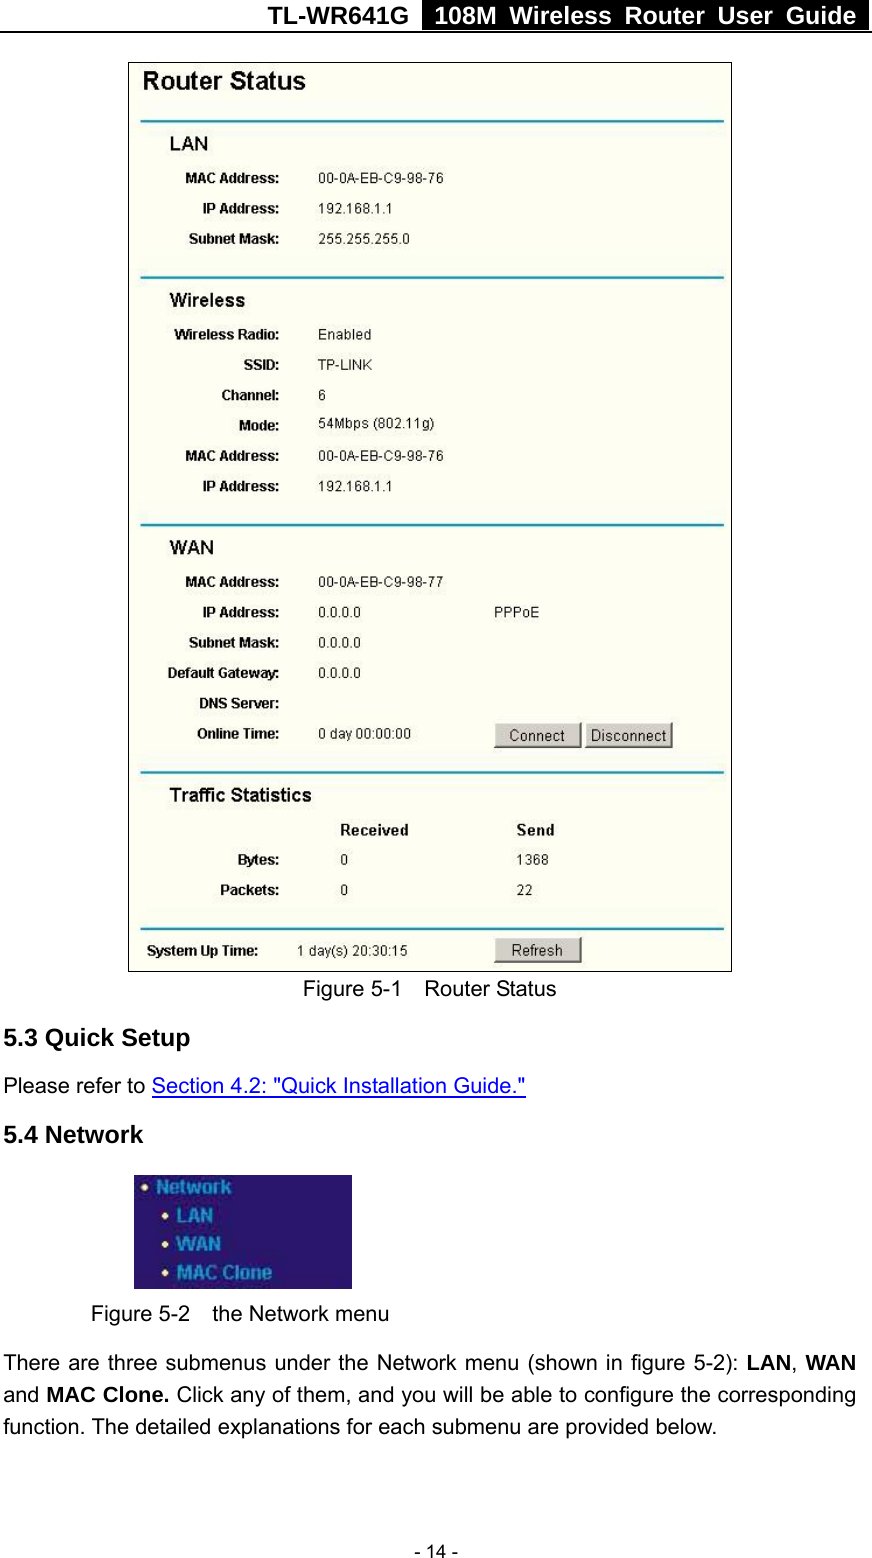 TL-WR641G   108M Wireless Router User Guide   - 14 - Figure 5-1  Router Status 5.3 Quick Setup Please refer to Section 4.2: &quot;Quick Installation Guide.&quot; 5.4 Network    Figure 5-2  the Network menu There are three submenus under the Network menu (shown in figure 5-2): LAN, WAN and MAC Clone. Click any of them, and you will be able to configure the corresponding function. The detailed explanations for each submenu are provided below. 